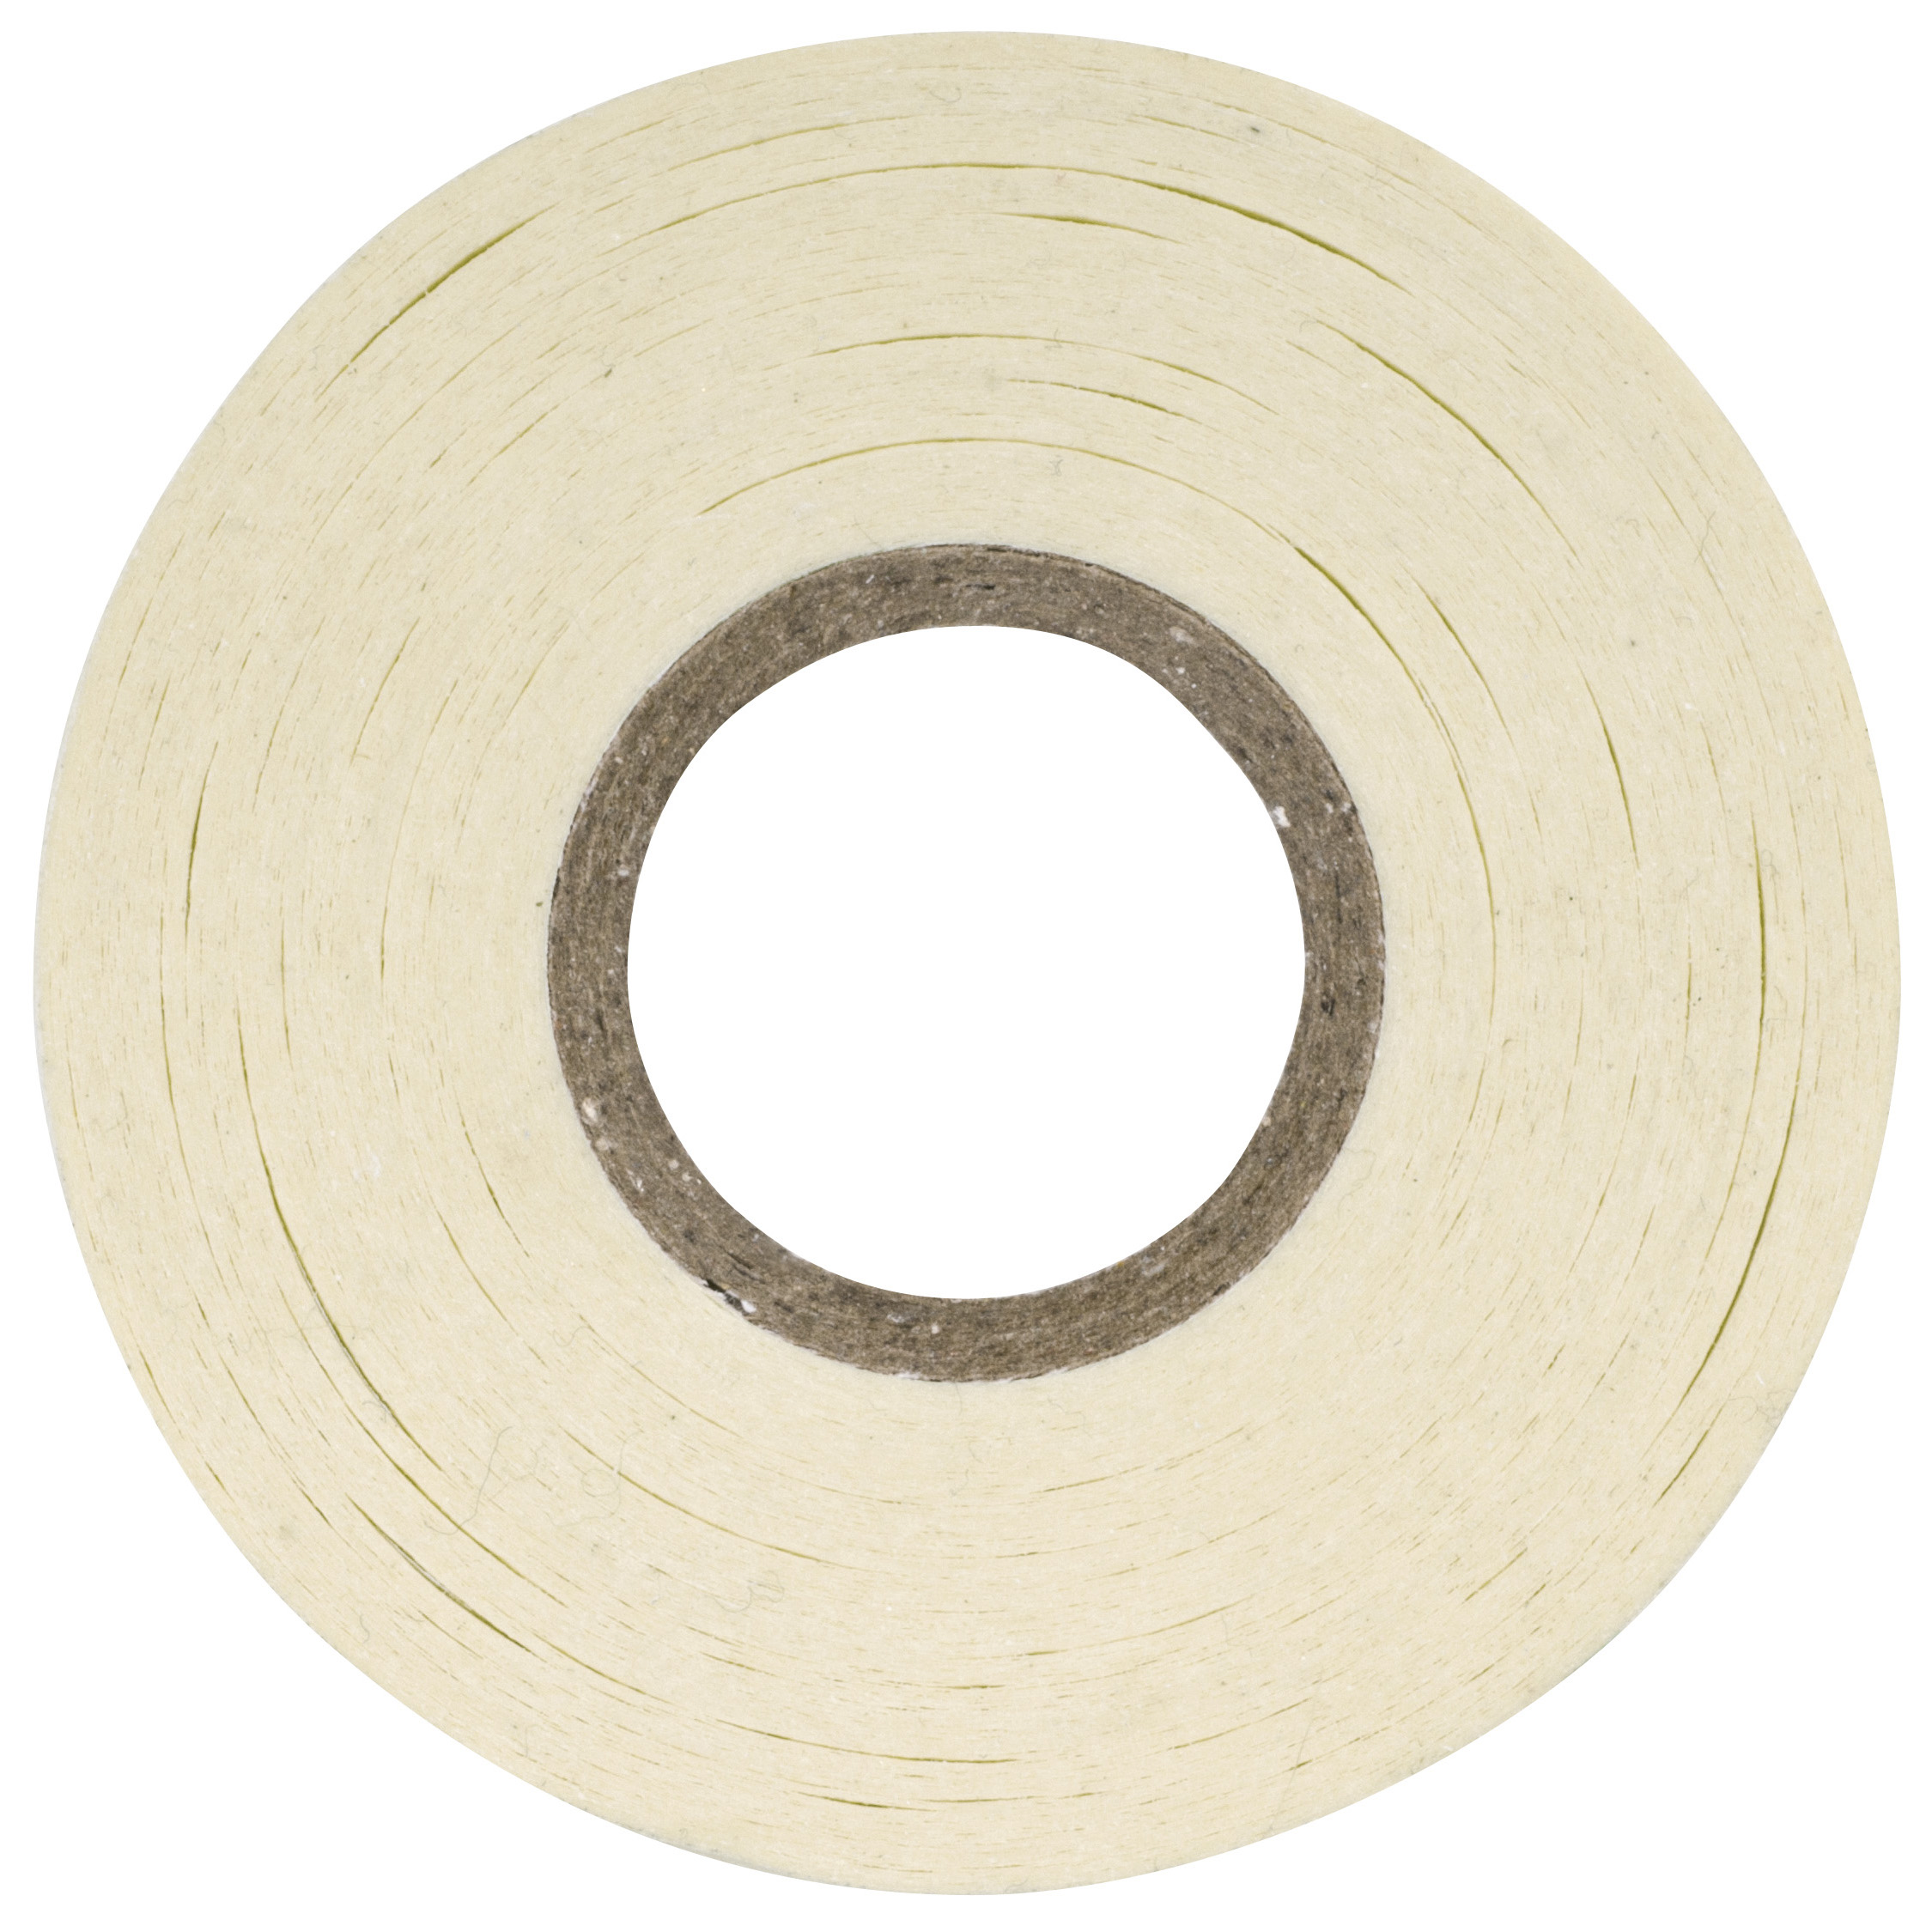 Quilters' Tape: 6mm x 27m: 1 Piece - Milward - Groves and Banks